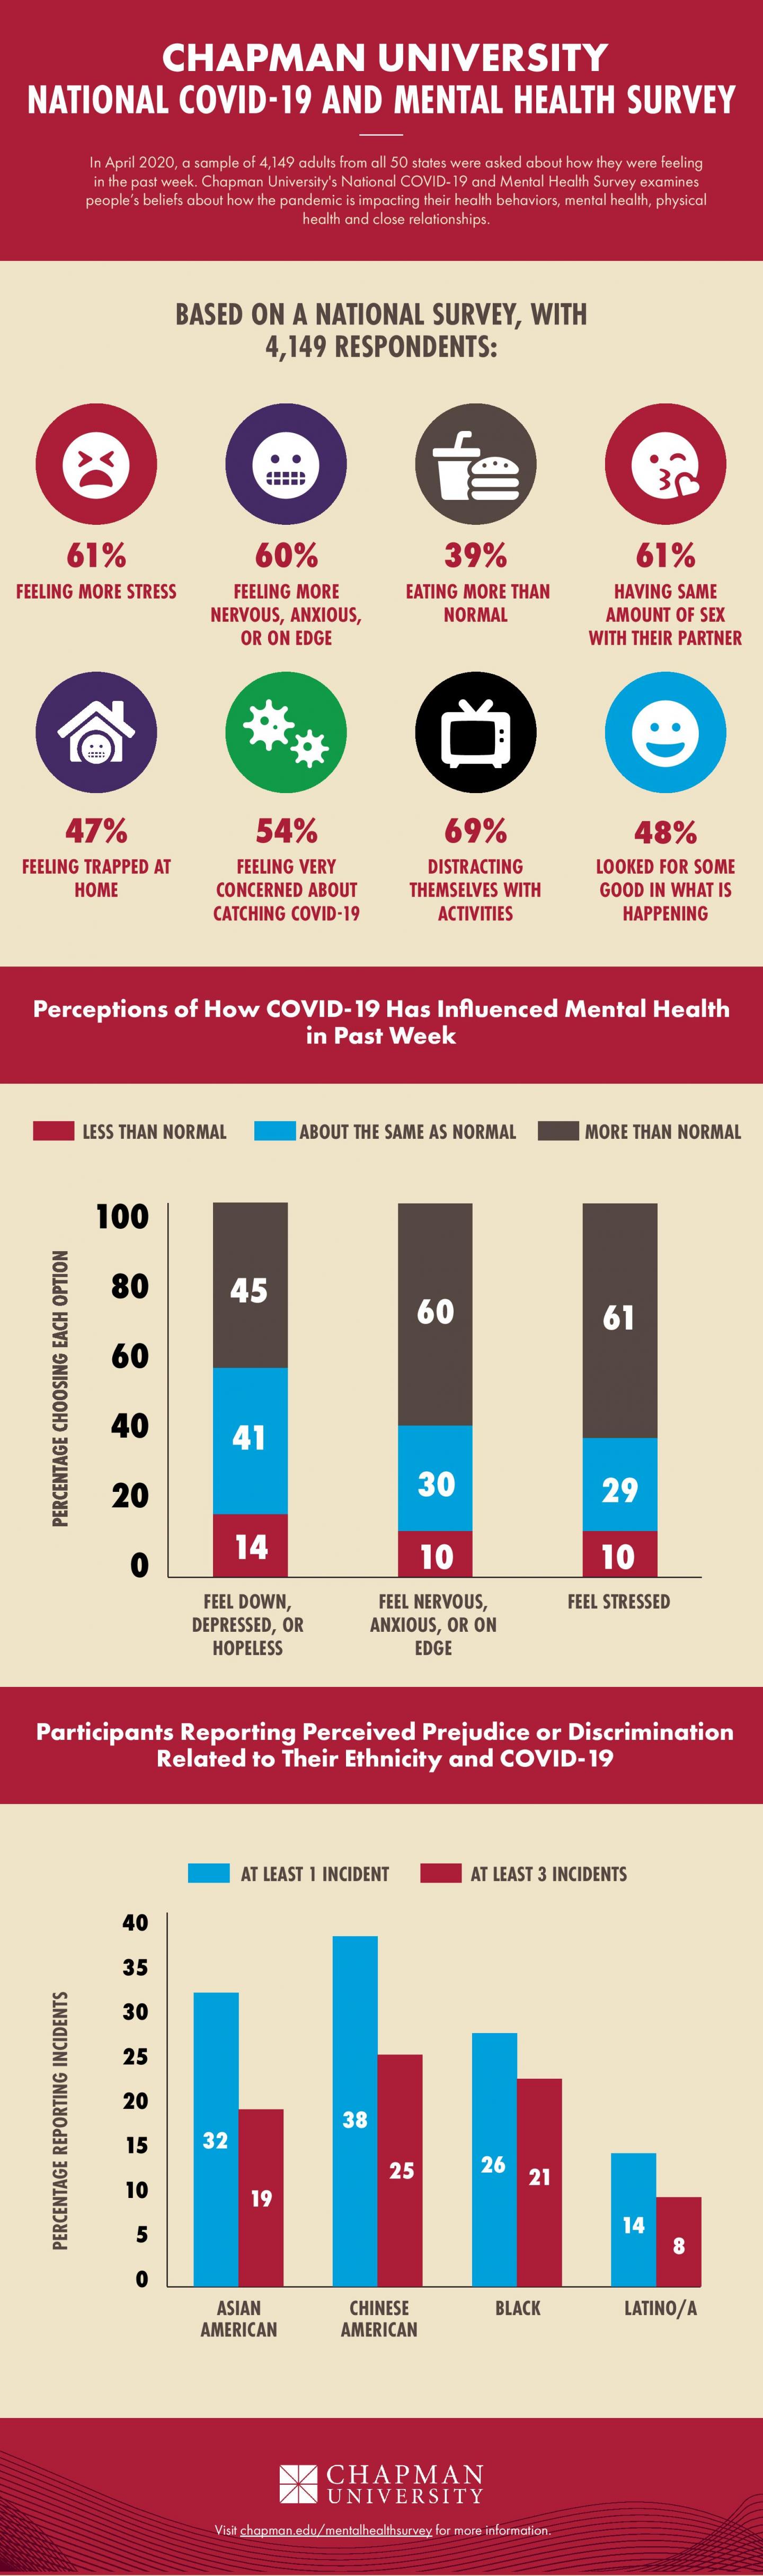 Chapman University National COVID-19 and Mental Health Survey Infographic